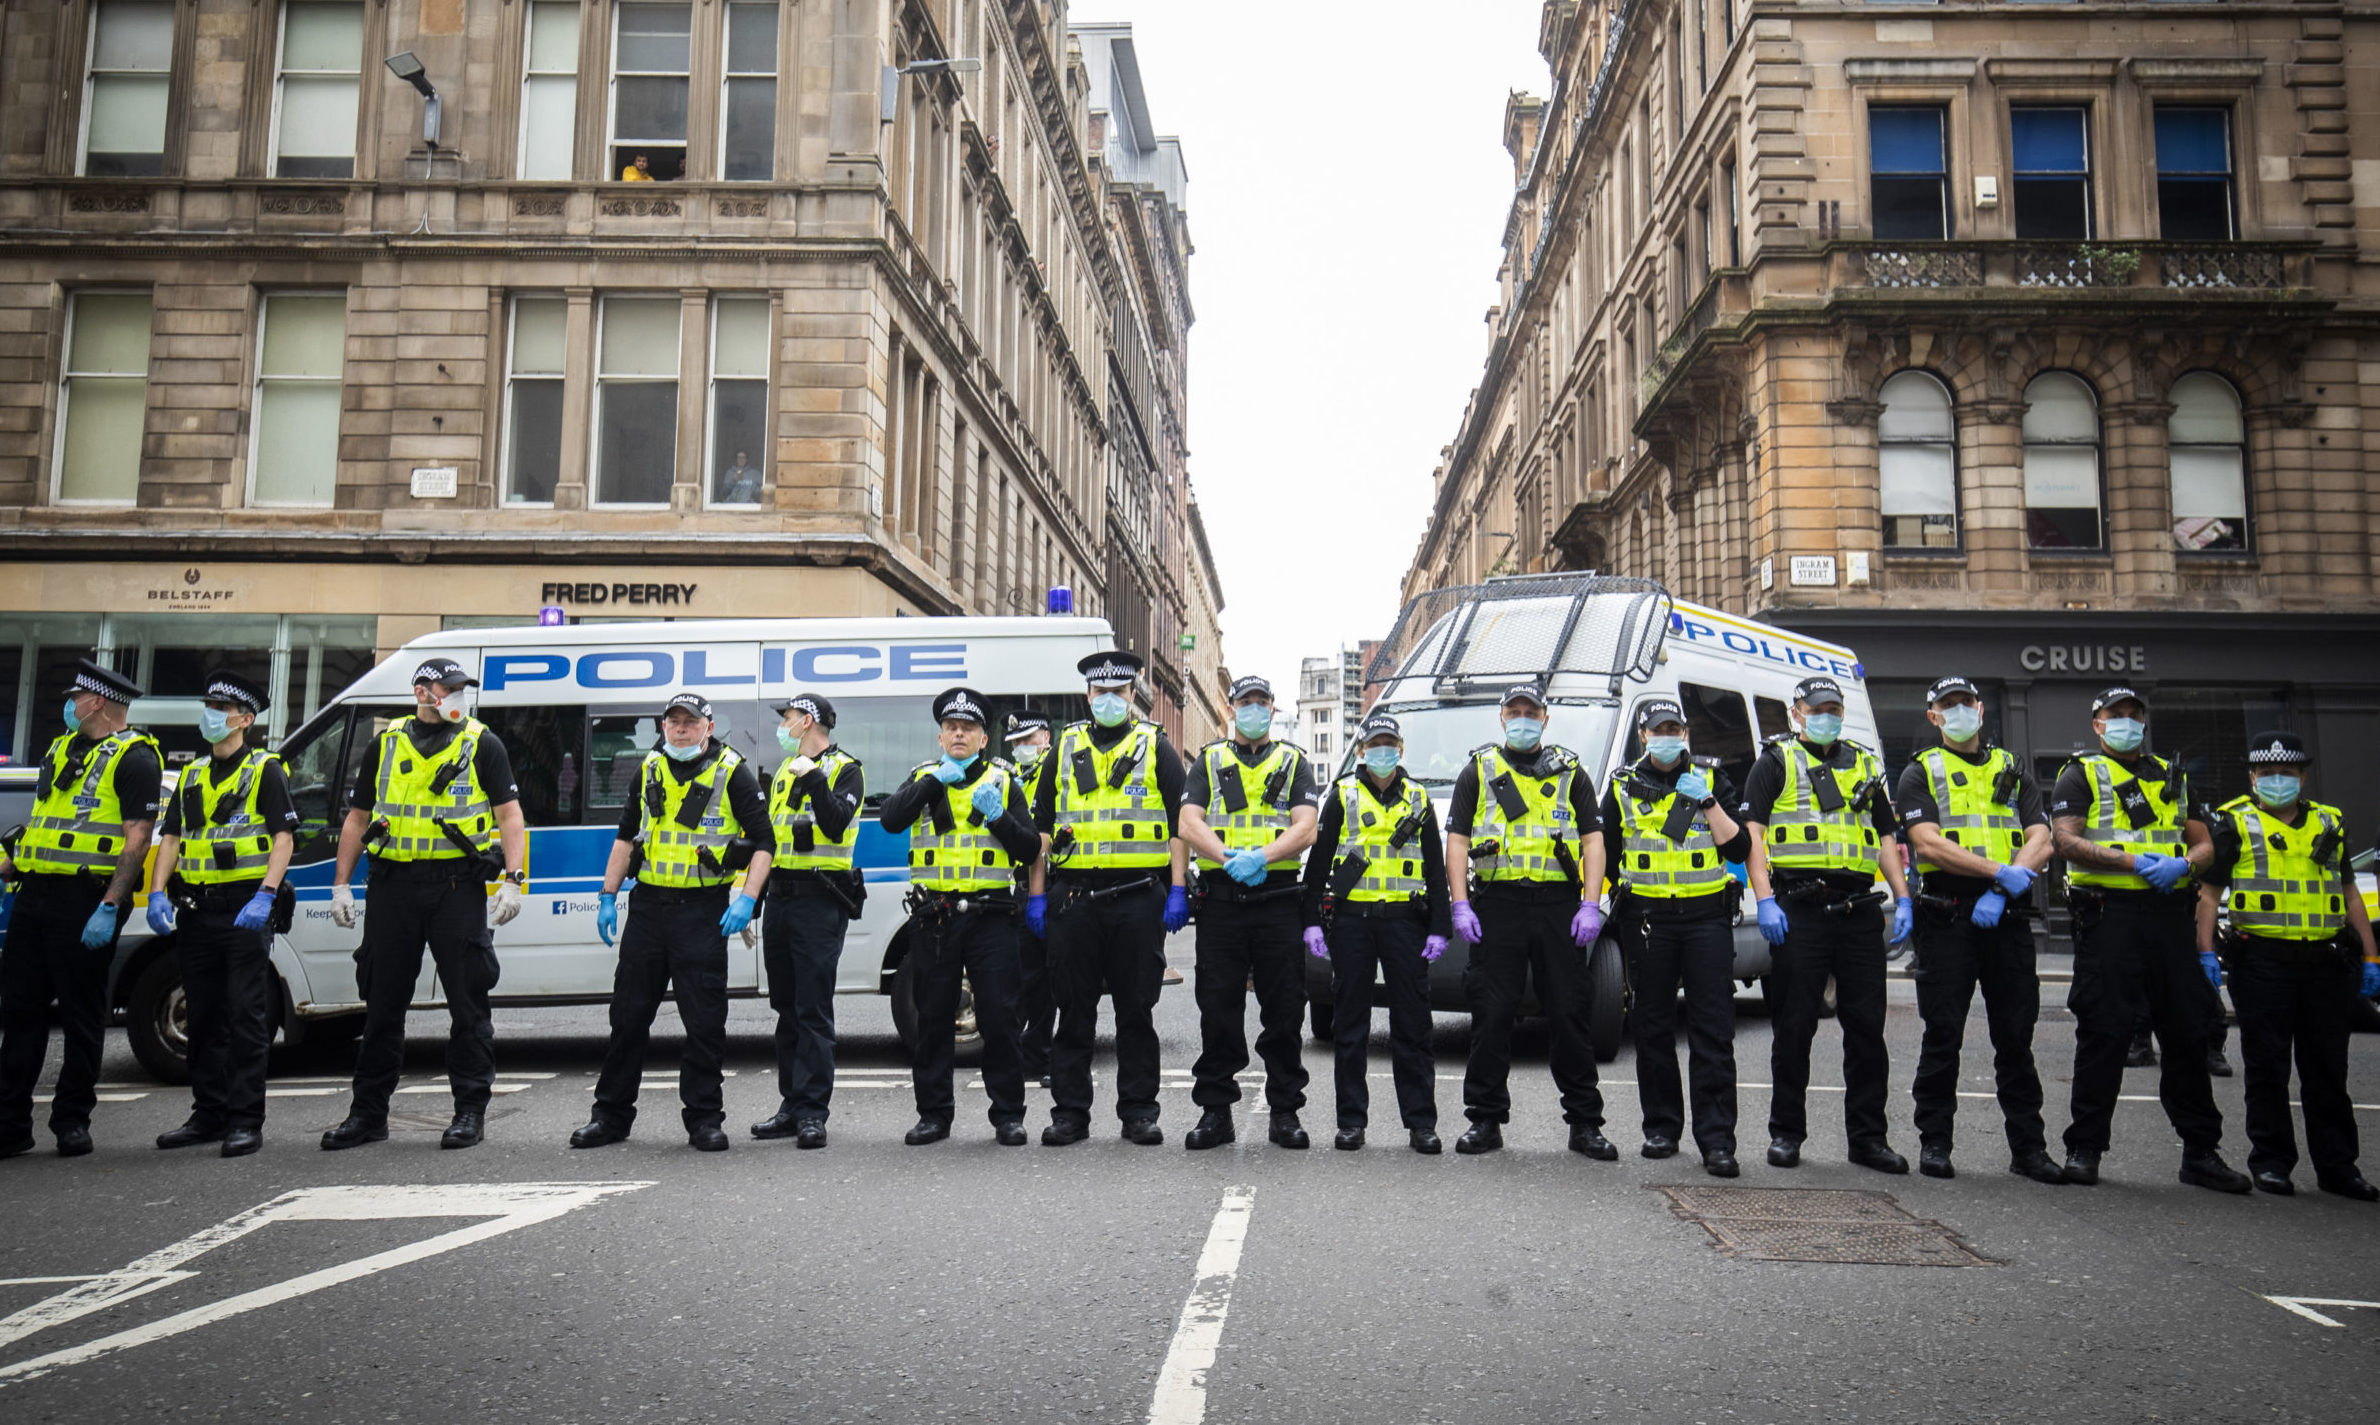 Police hold back protesters at a demonstration organised by the Loyalist Defence League in George Square in Glasgow.